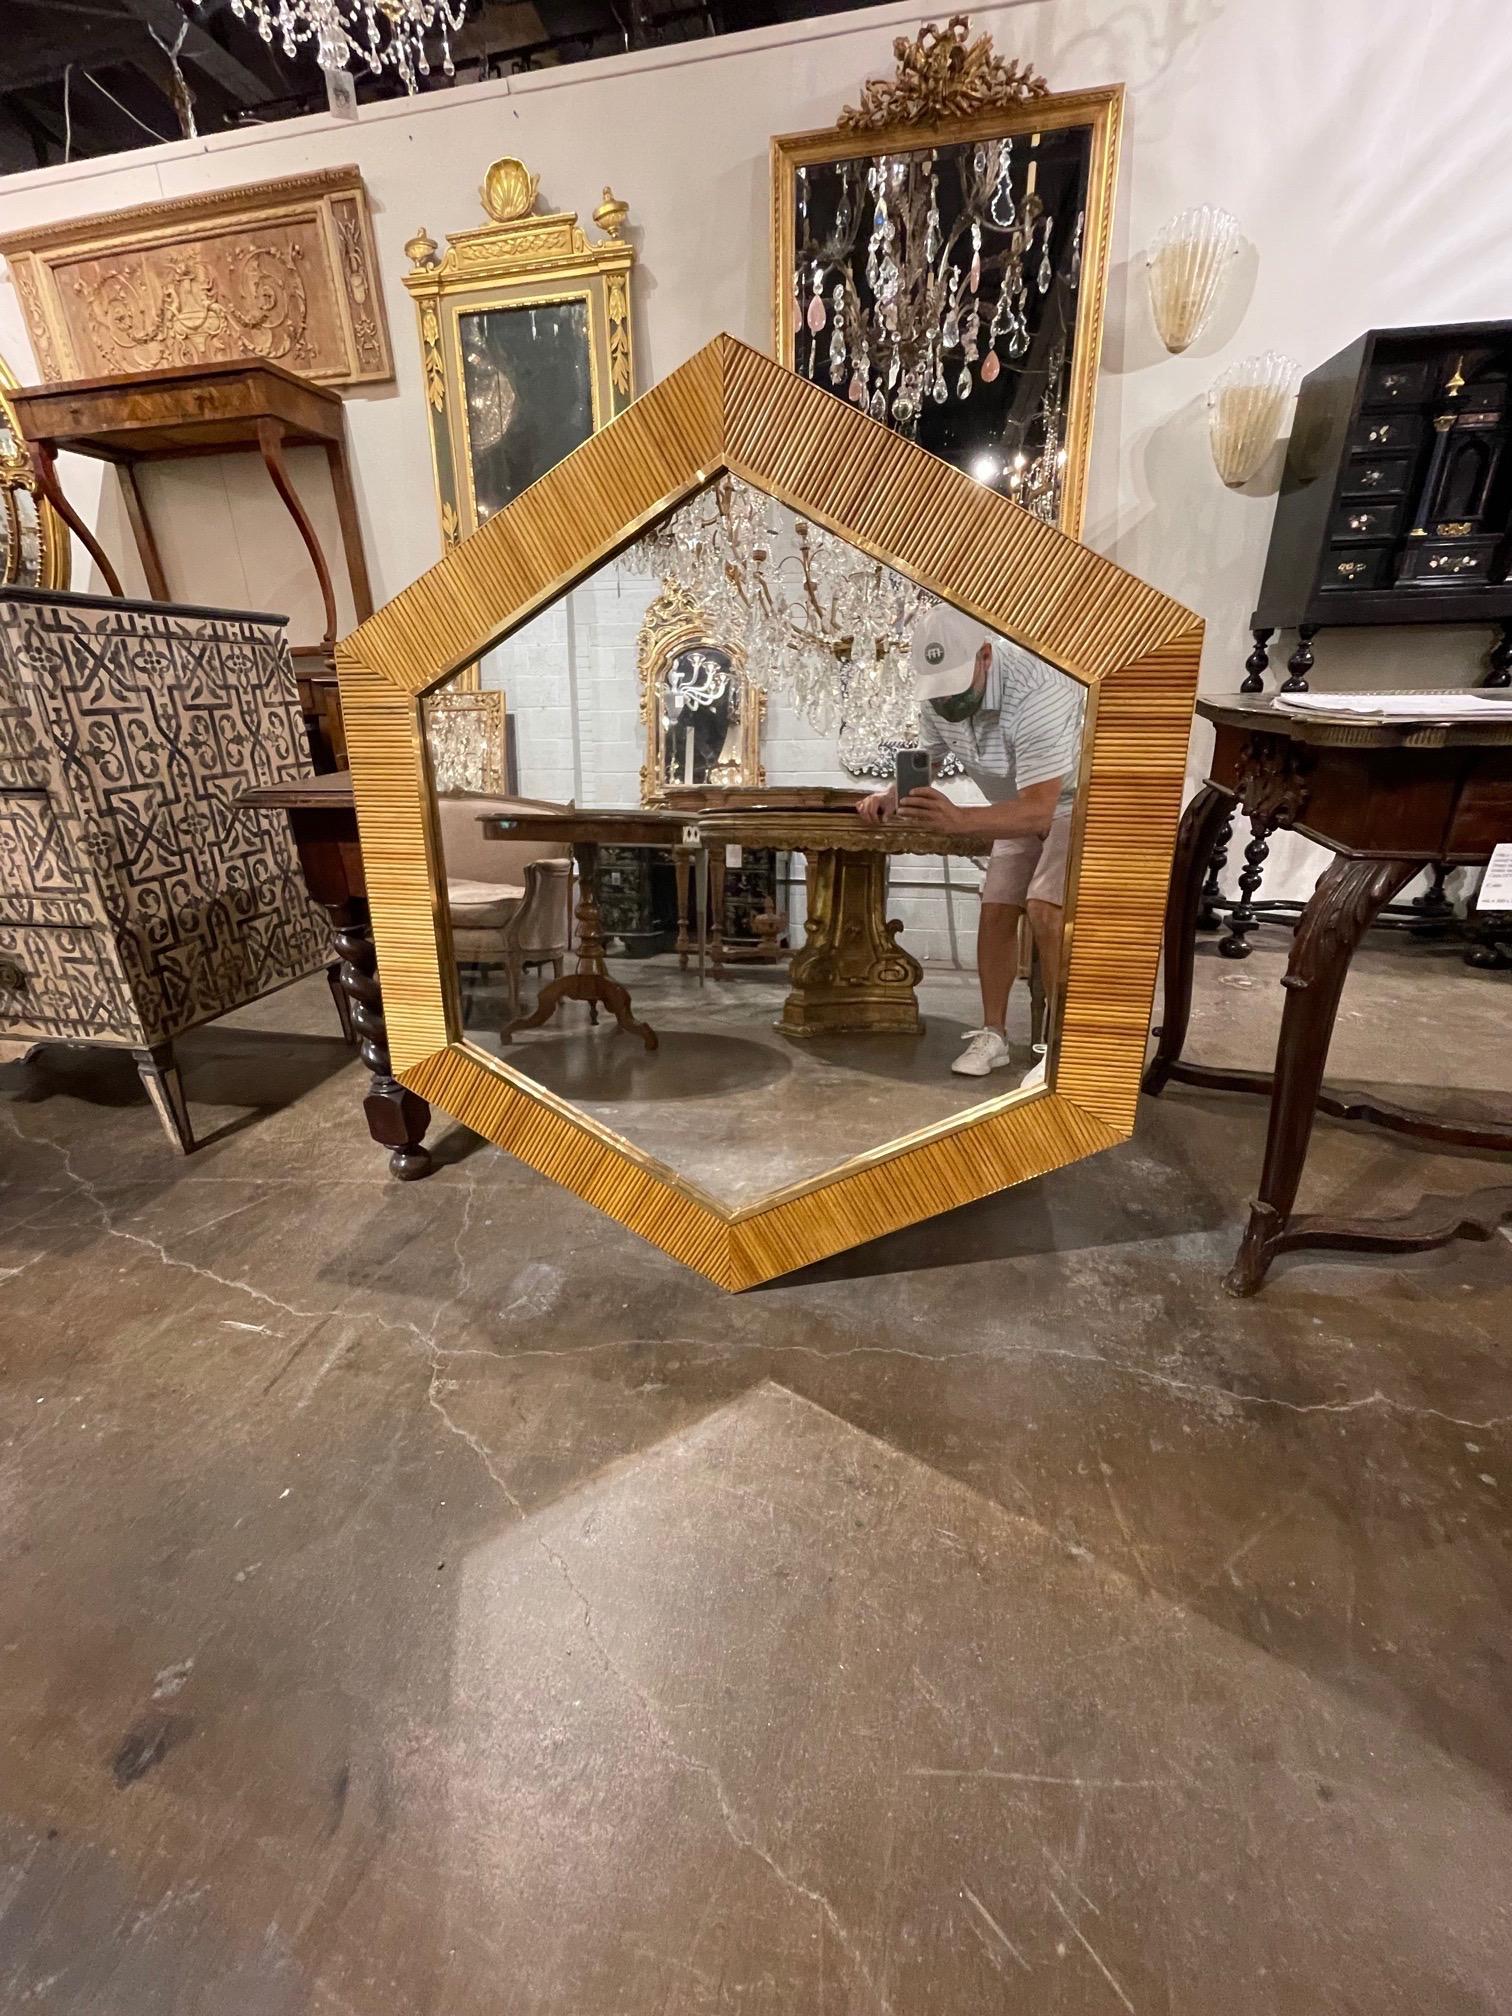 Great pair of vintage Italian bamboo and brass hex shaped mirrors. A lovely decorative element!
Note: Price listed is per item.